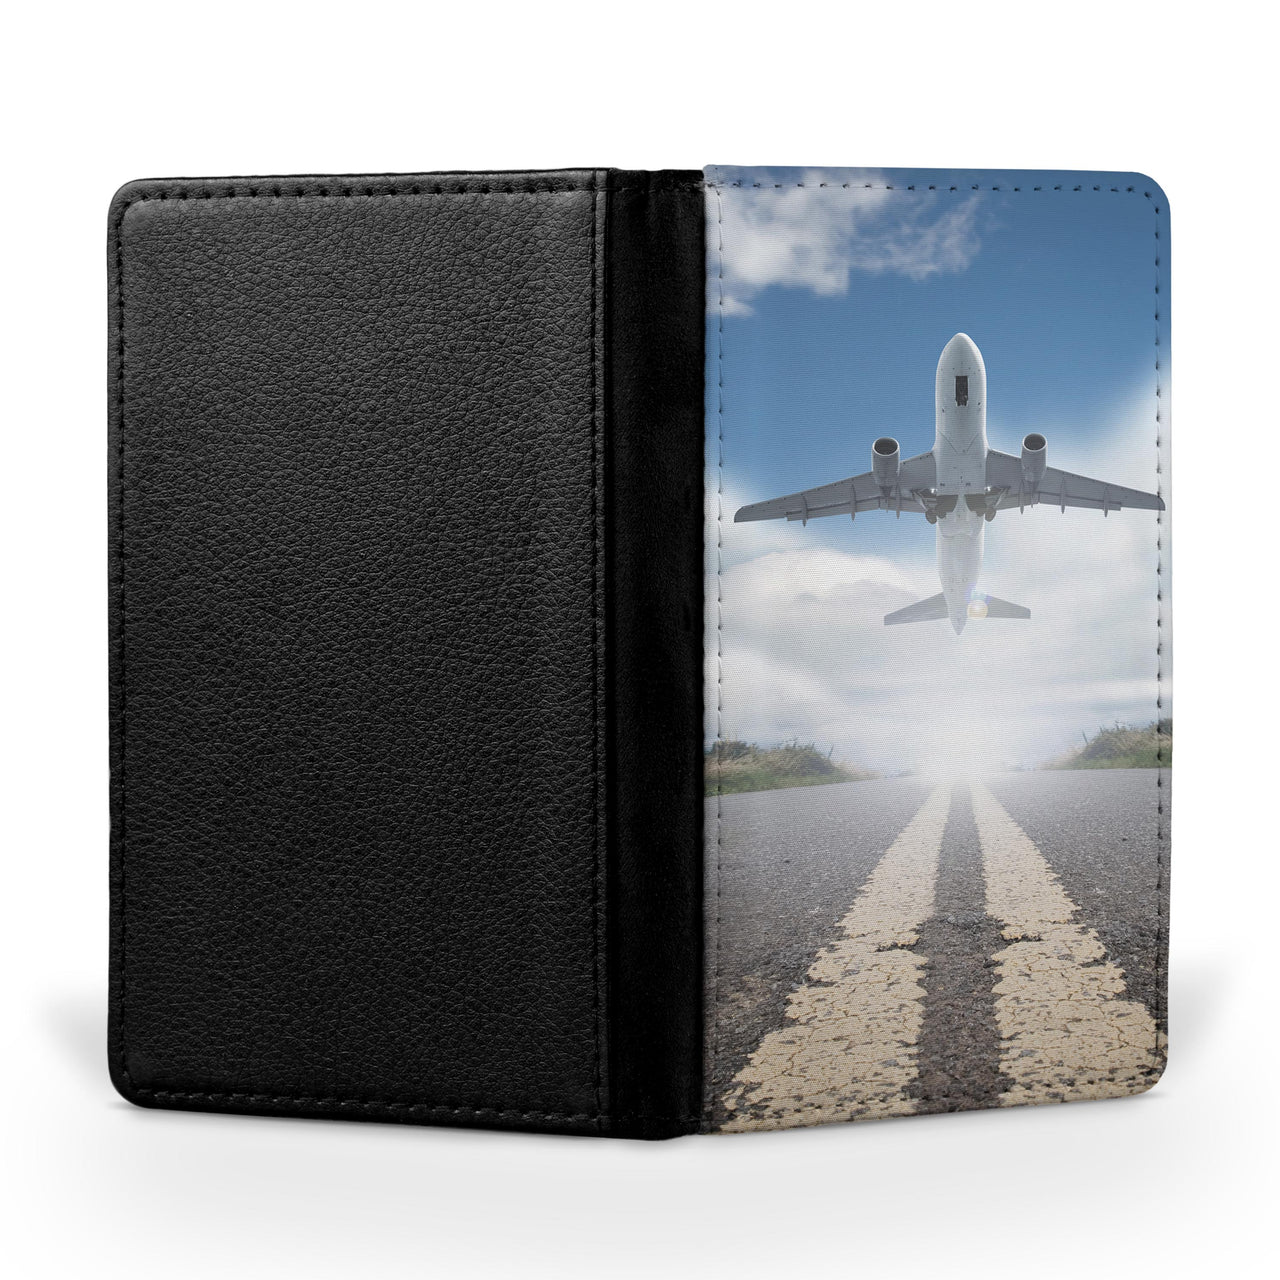 Taking Off Aircraft Printed Passport & Travel Cases